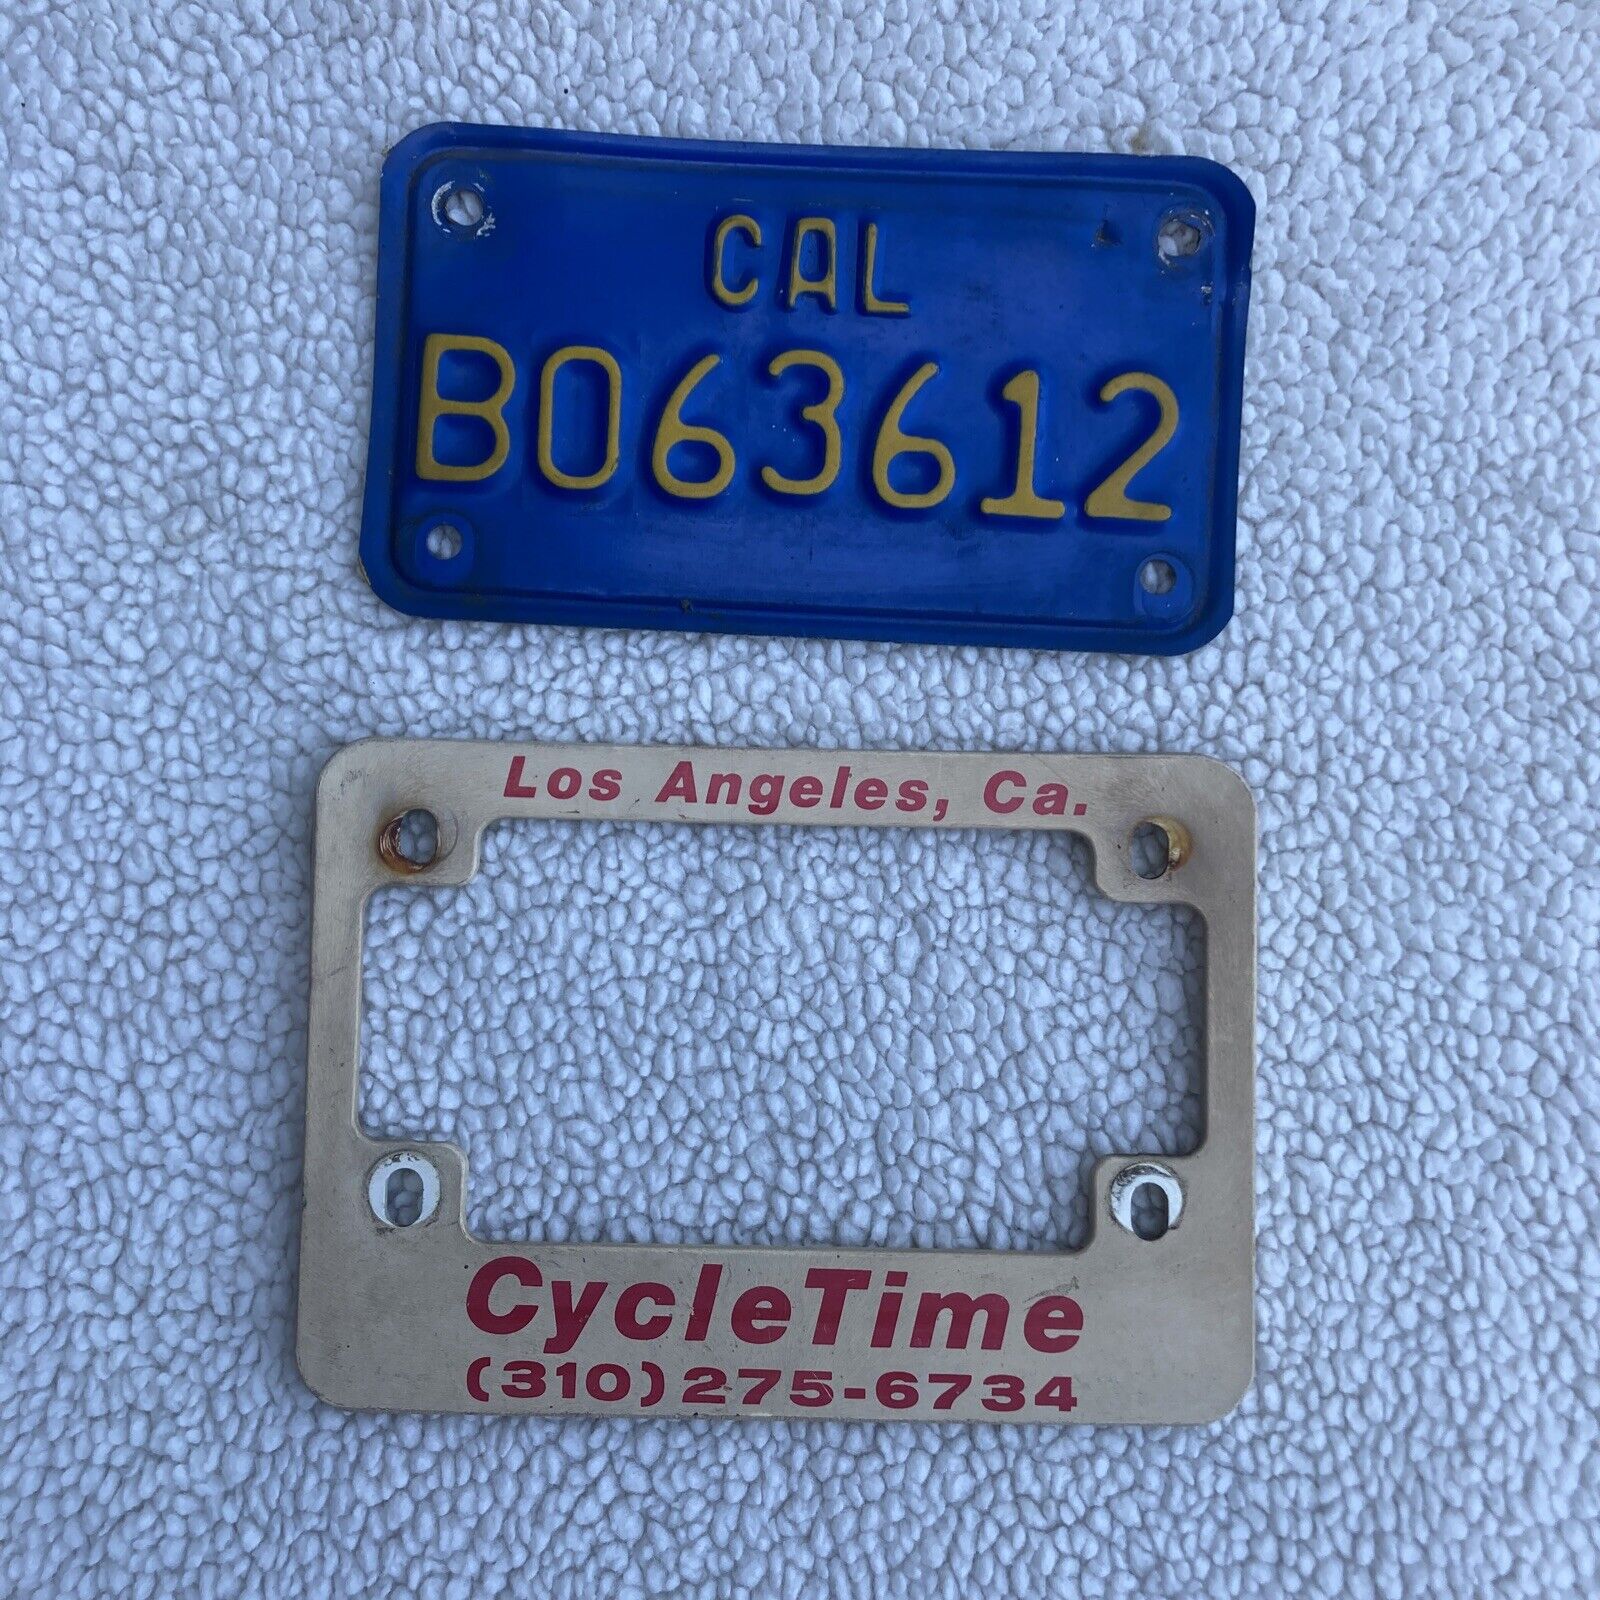 1970s CALIFORNIA Moped Only License Plate CA